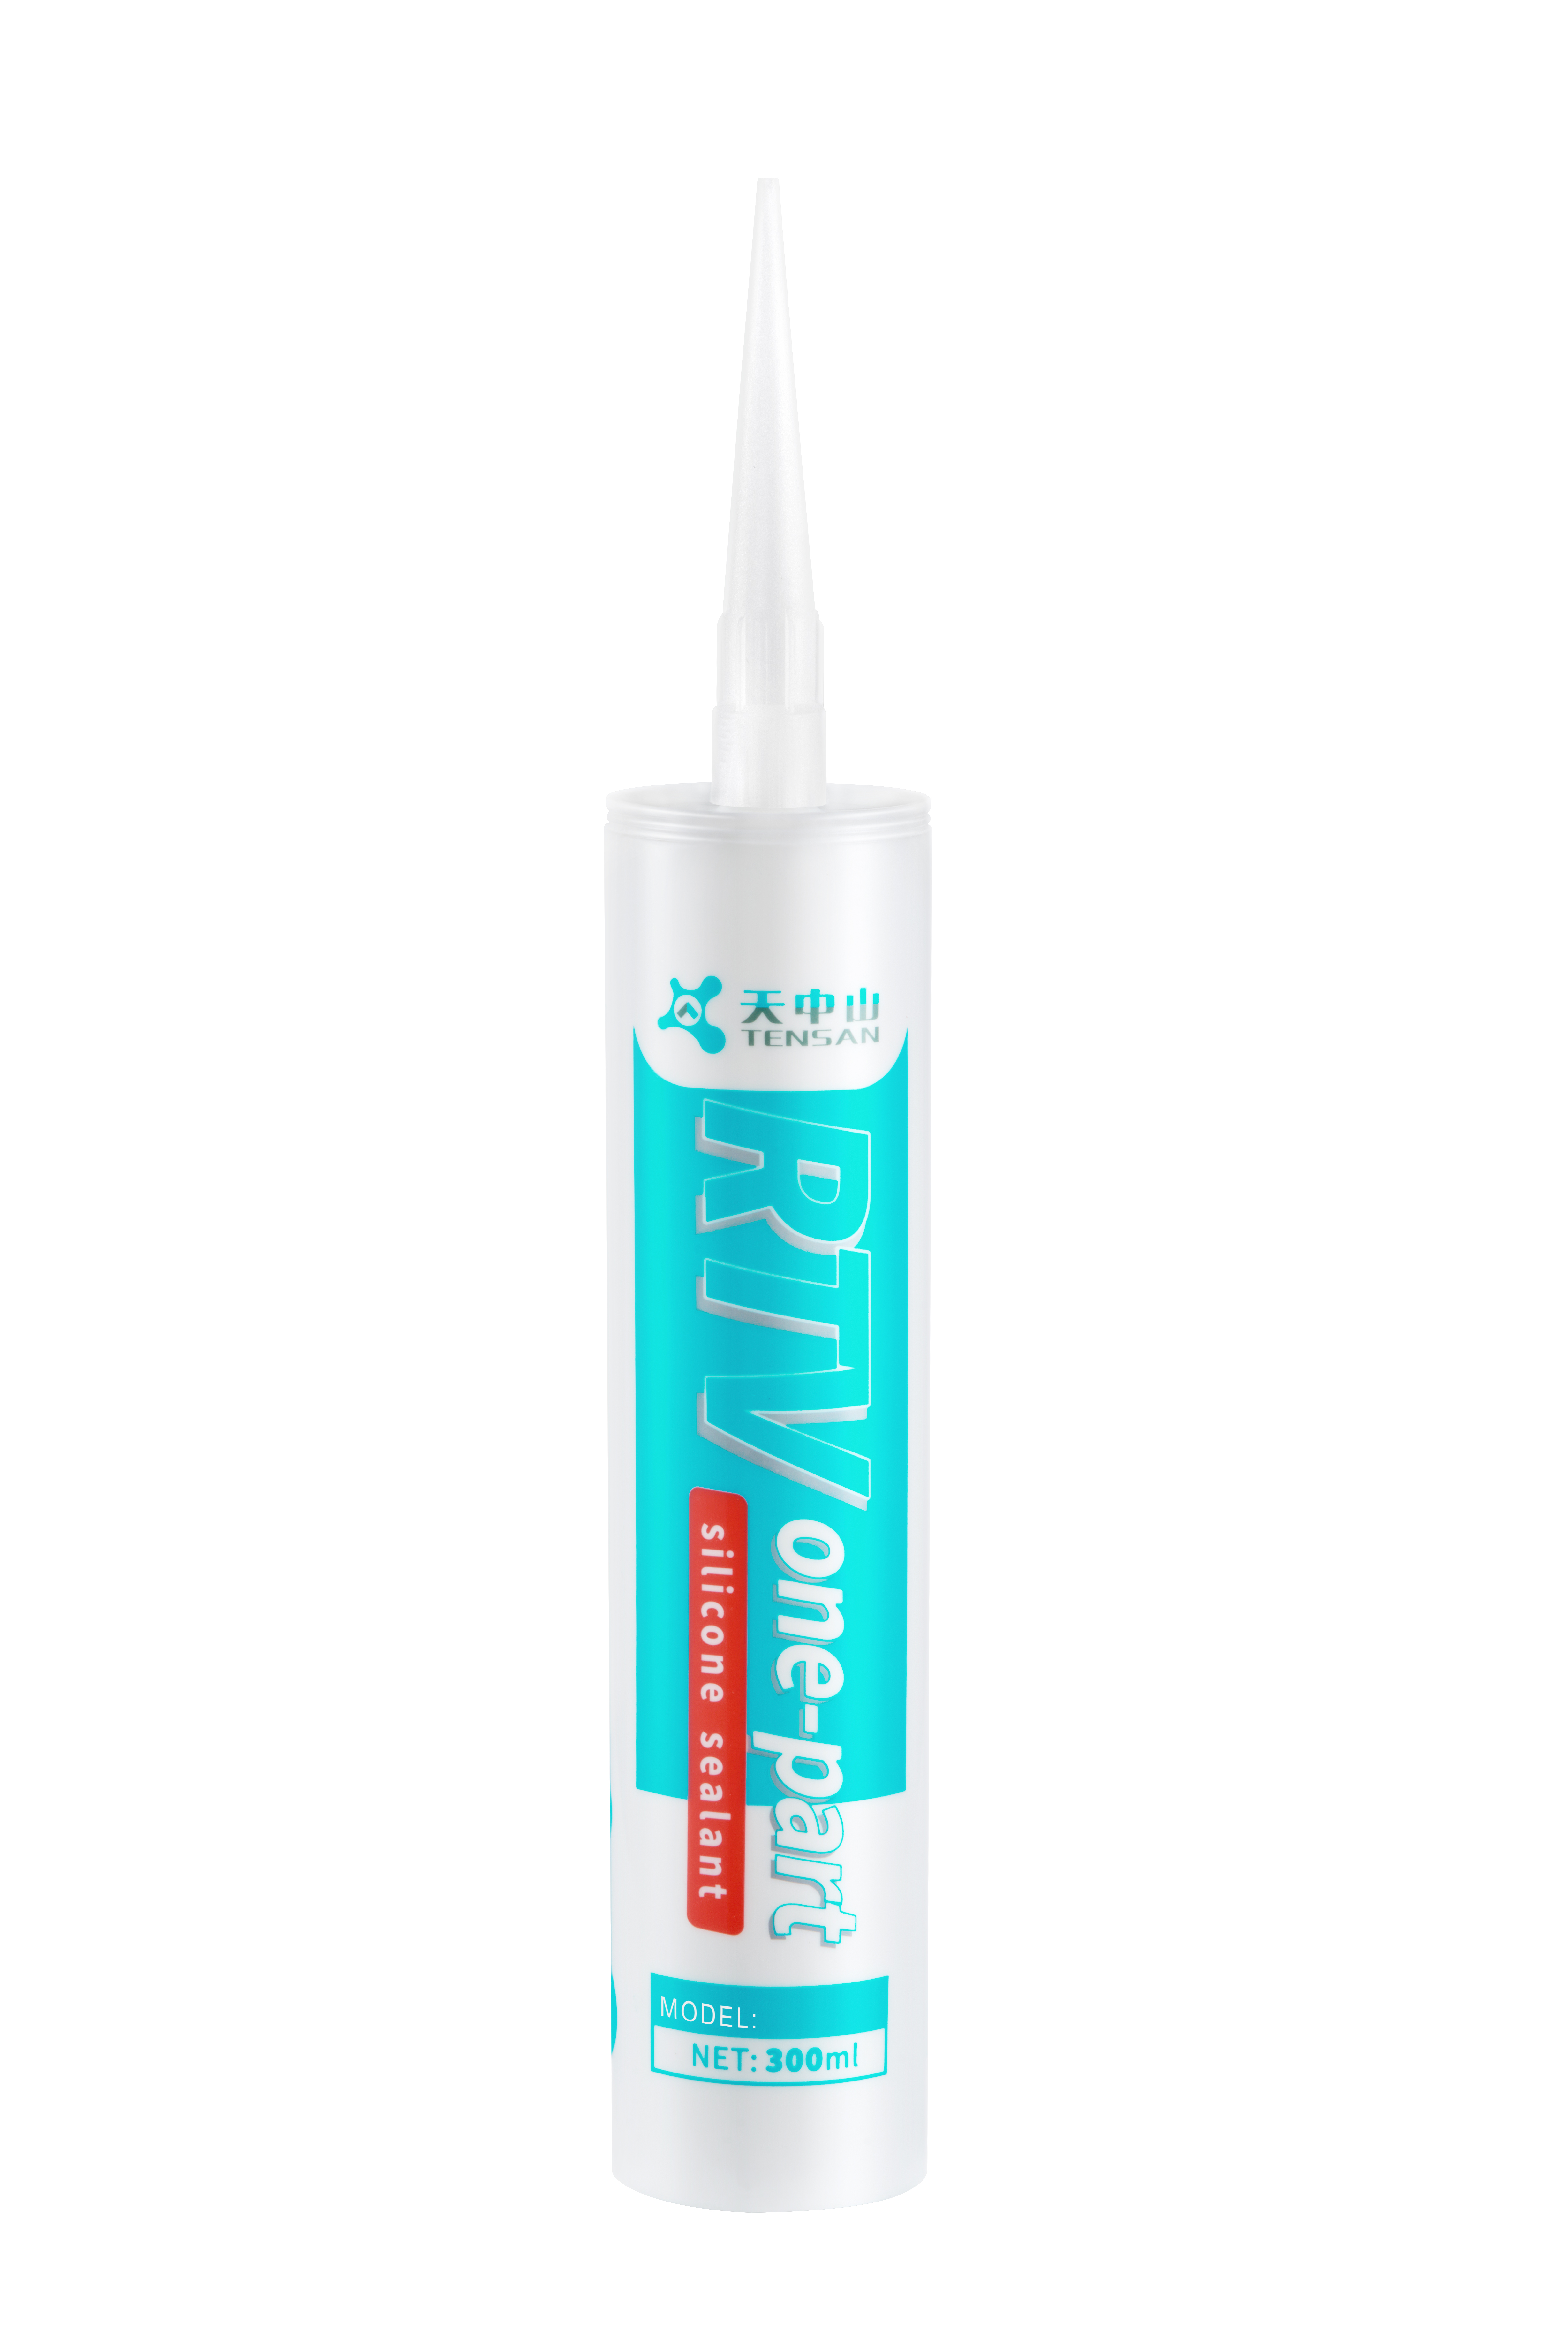 Does silicone sealant bond well? How to clean? alt=